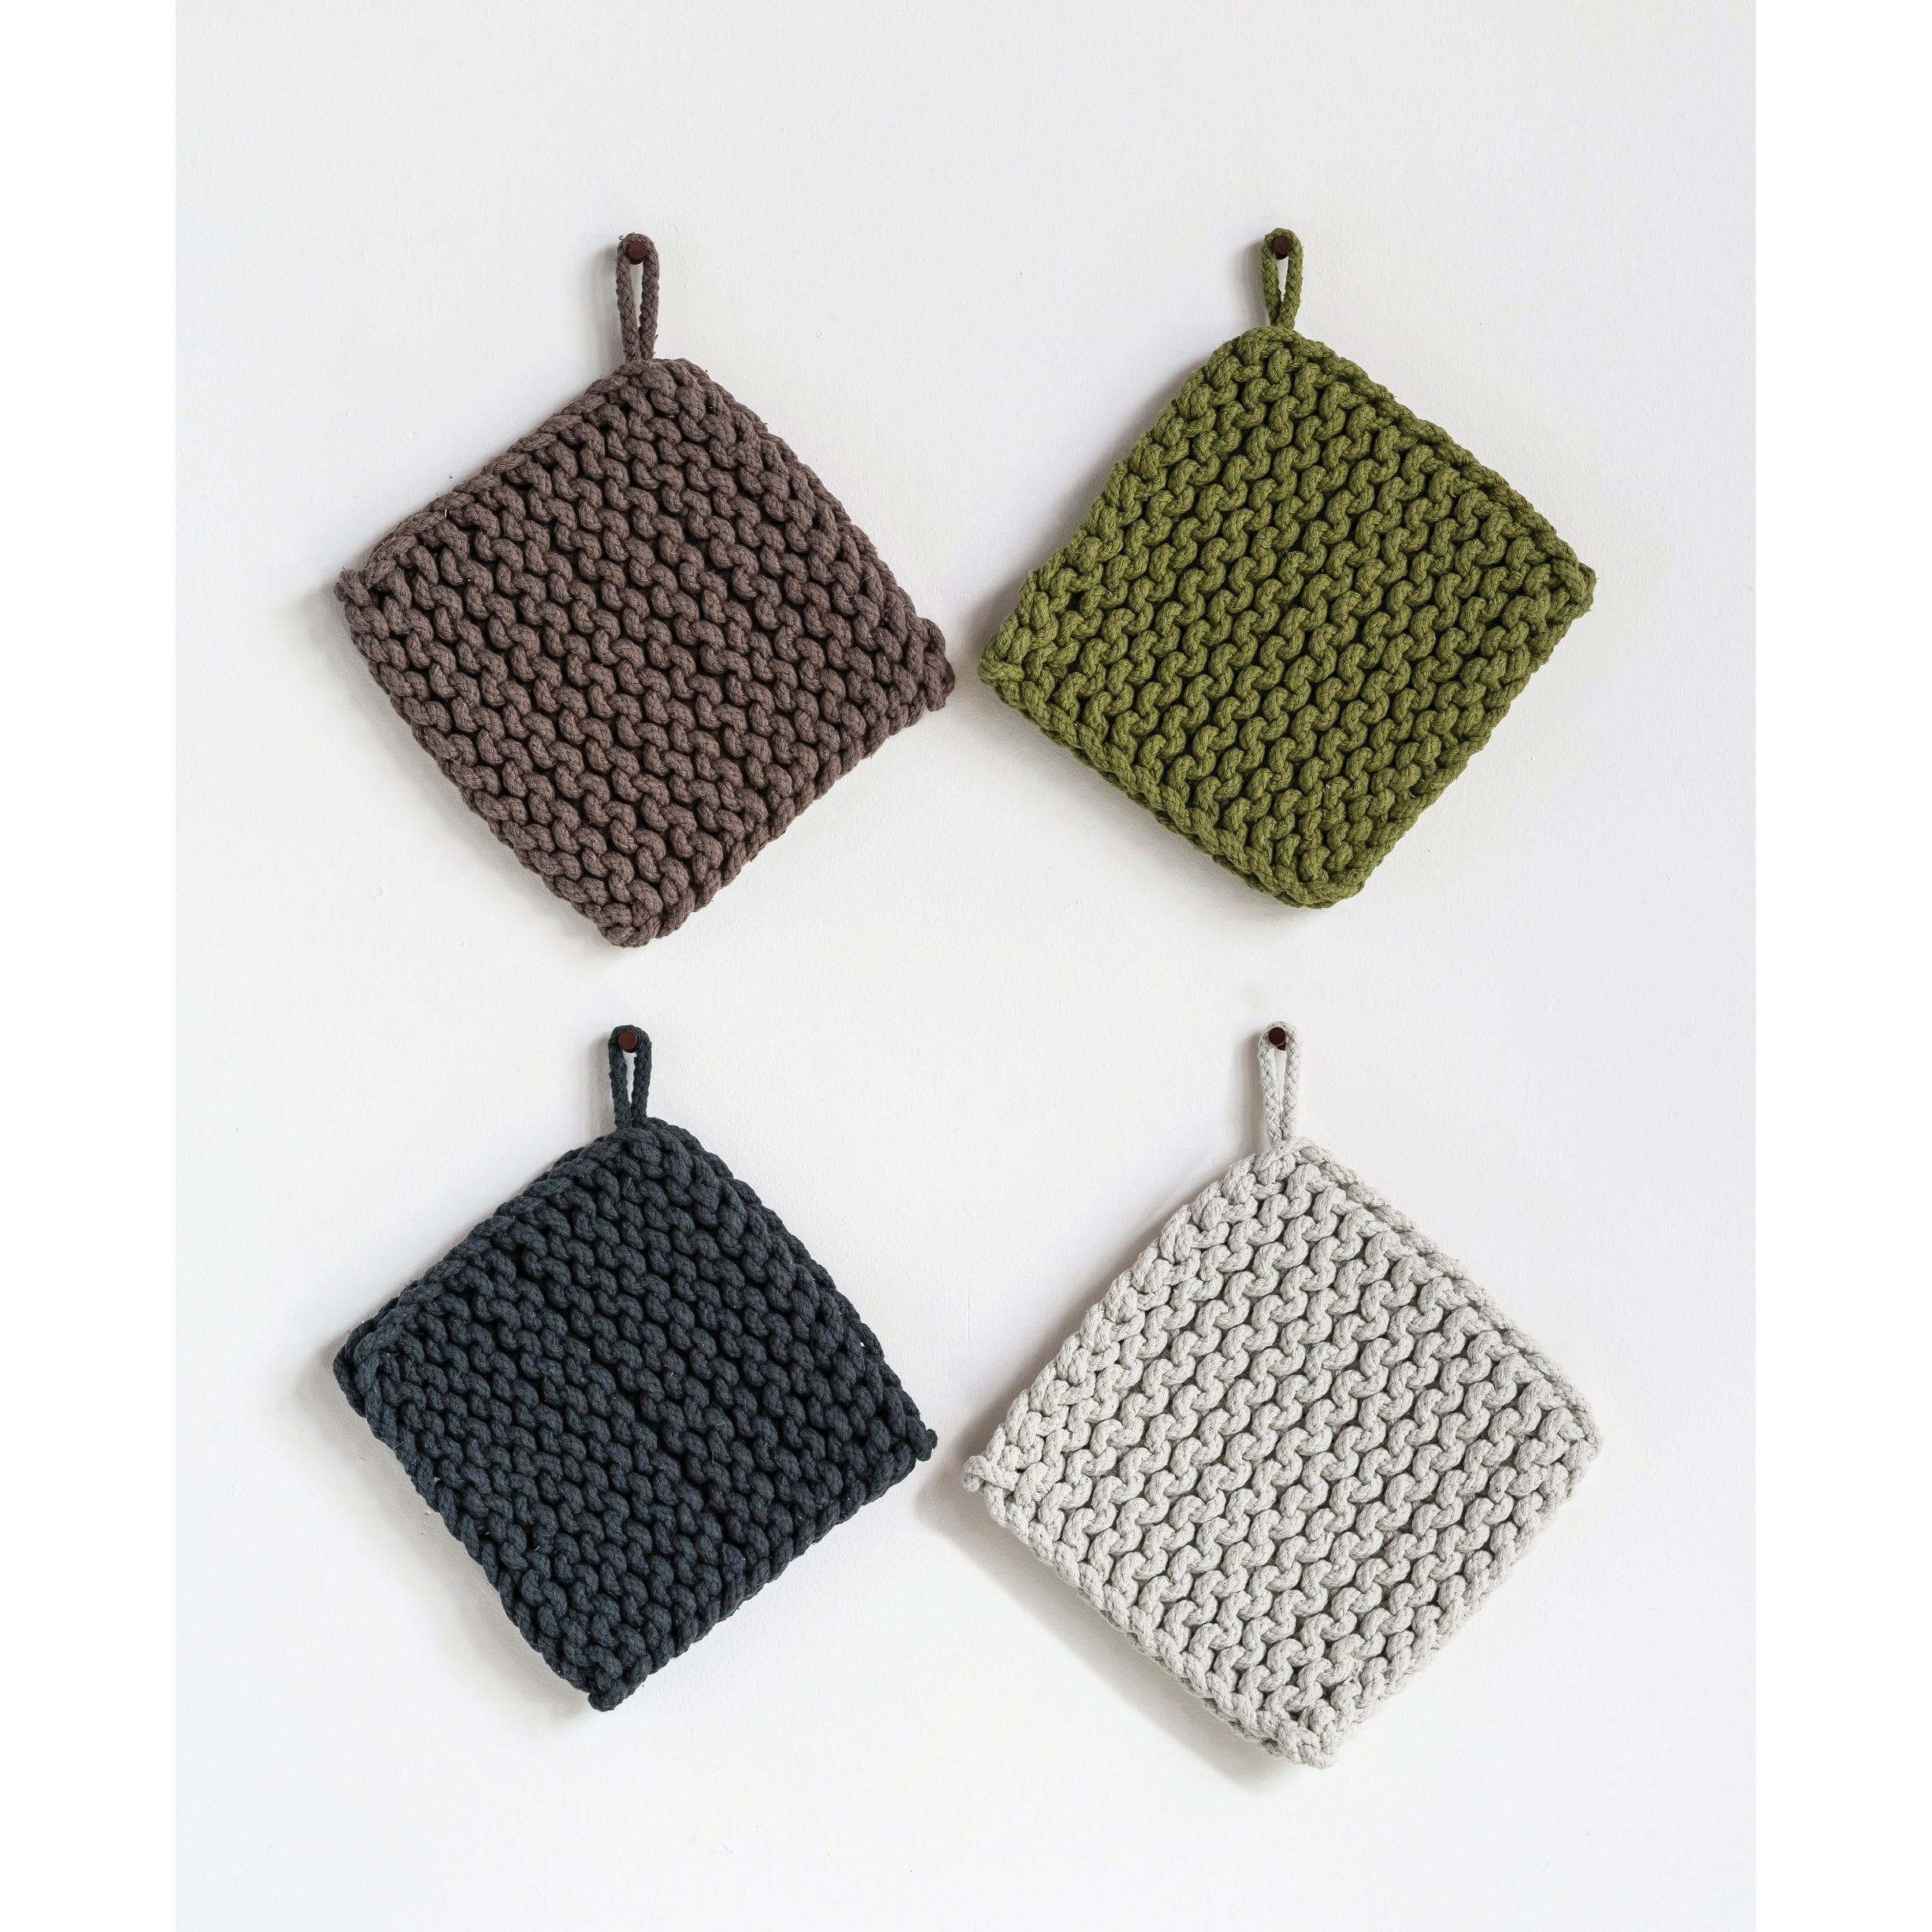  Creative Co-Op Square Cotton Crocheted Potholders/Hot Pads (Set  of 4 Colors) Pot Holders, Multicolor, 4 Count : Home & Kitchen